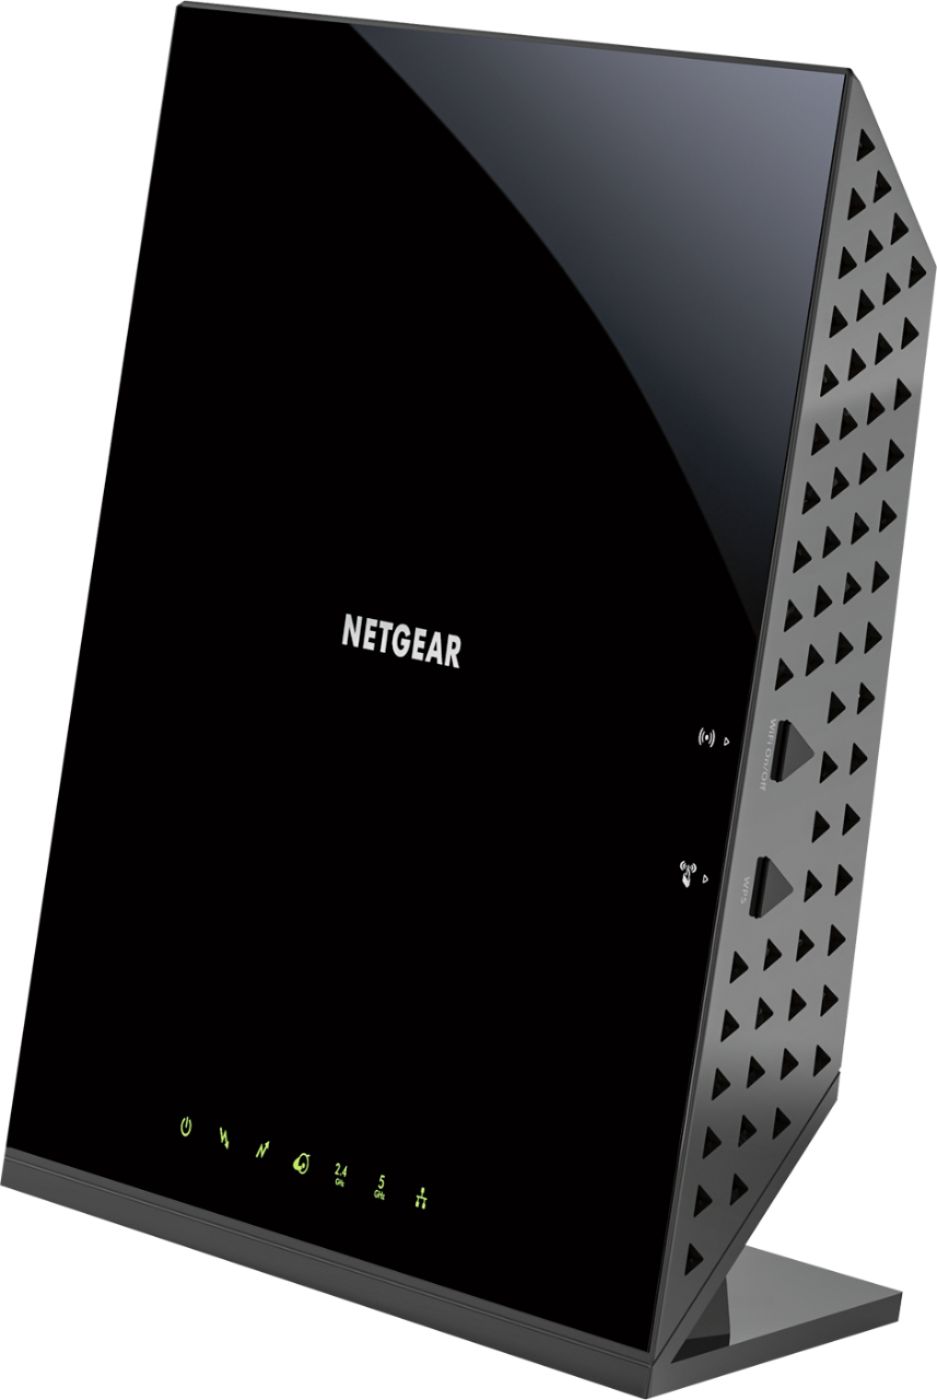 Left View: NETGEAR - Dual-Band AC1600 Router with 16 x 4 DOCSIS 3.0 Cable Modem - Black